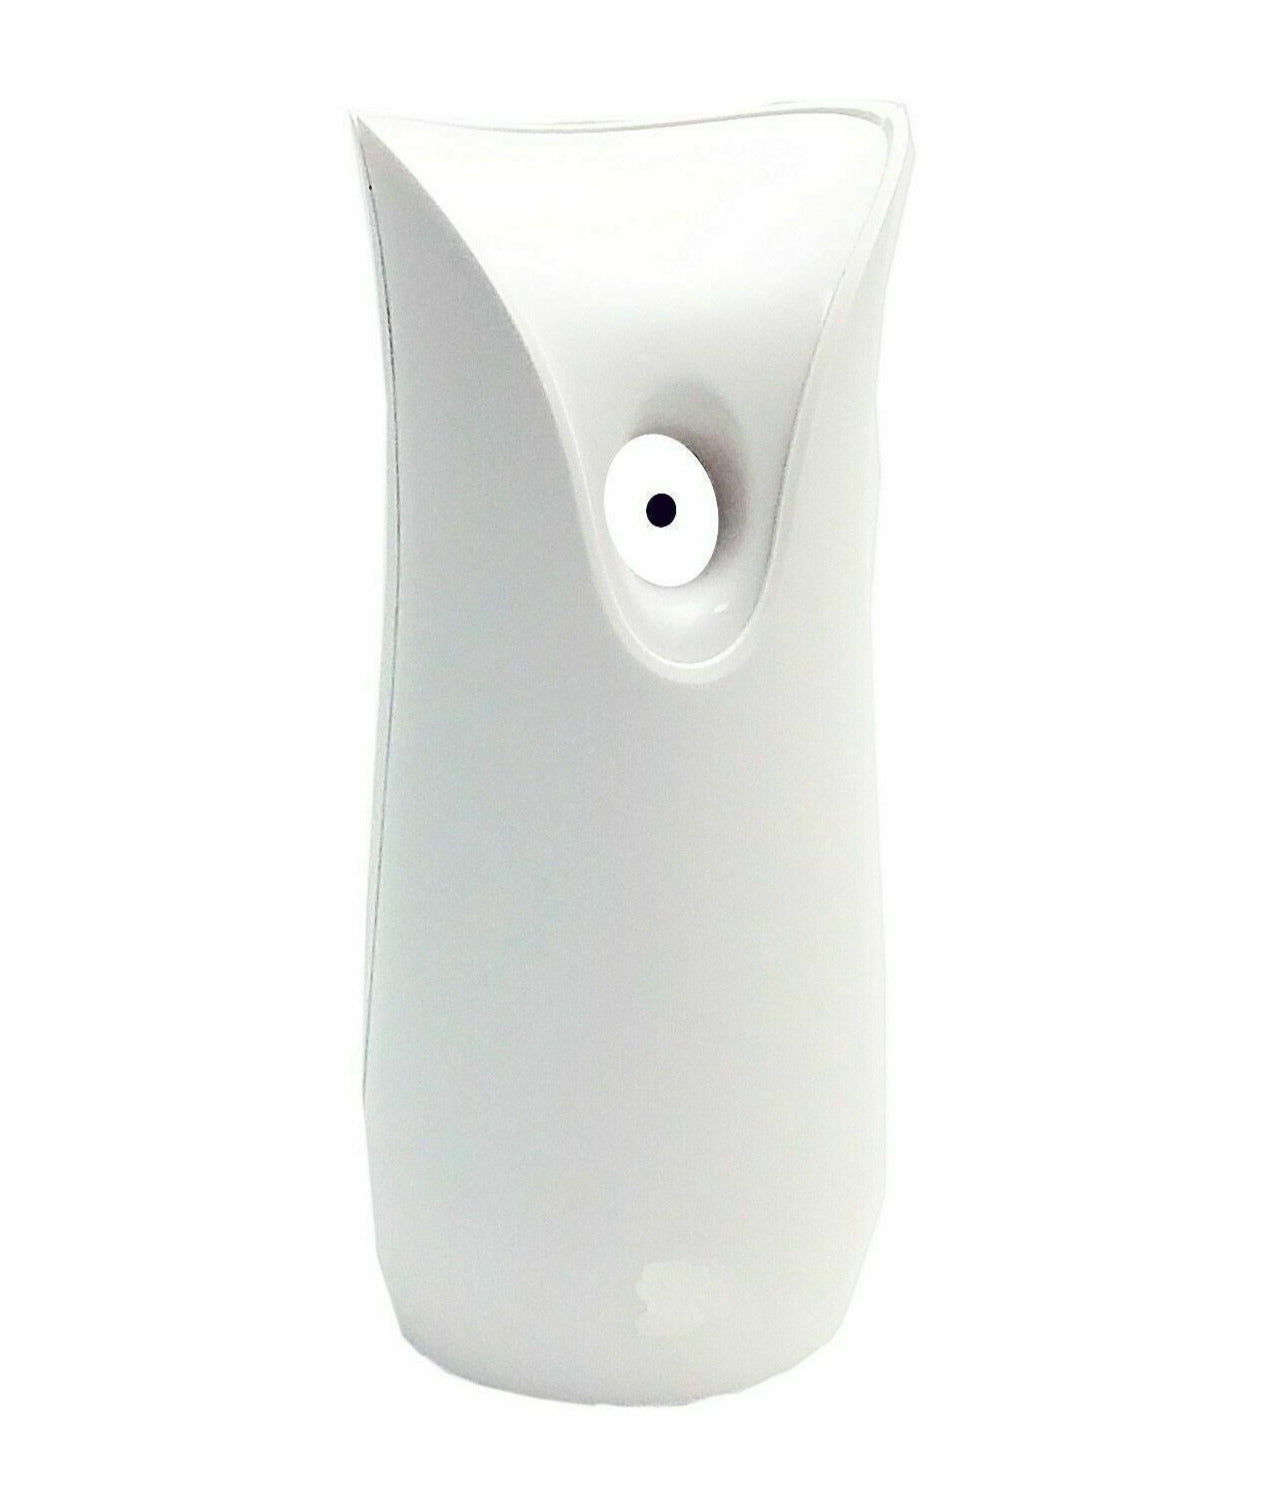 White automatic air freshener dispenser with spy technology on a white background.